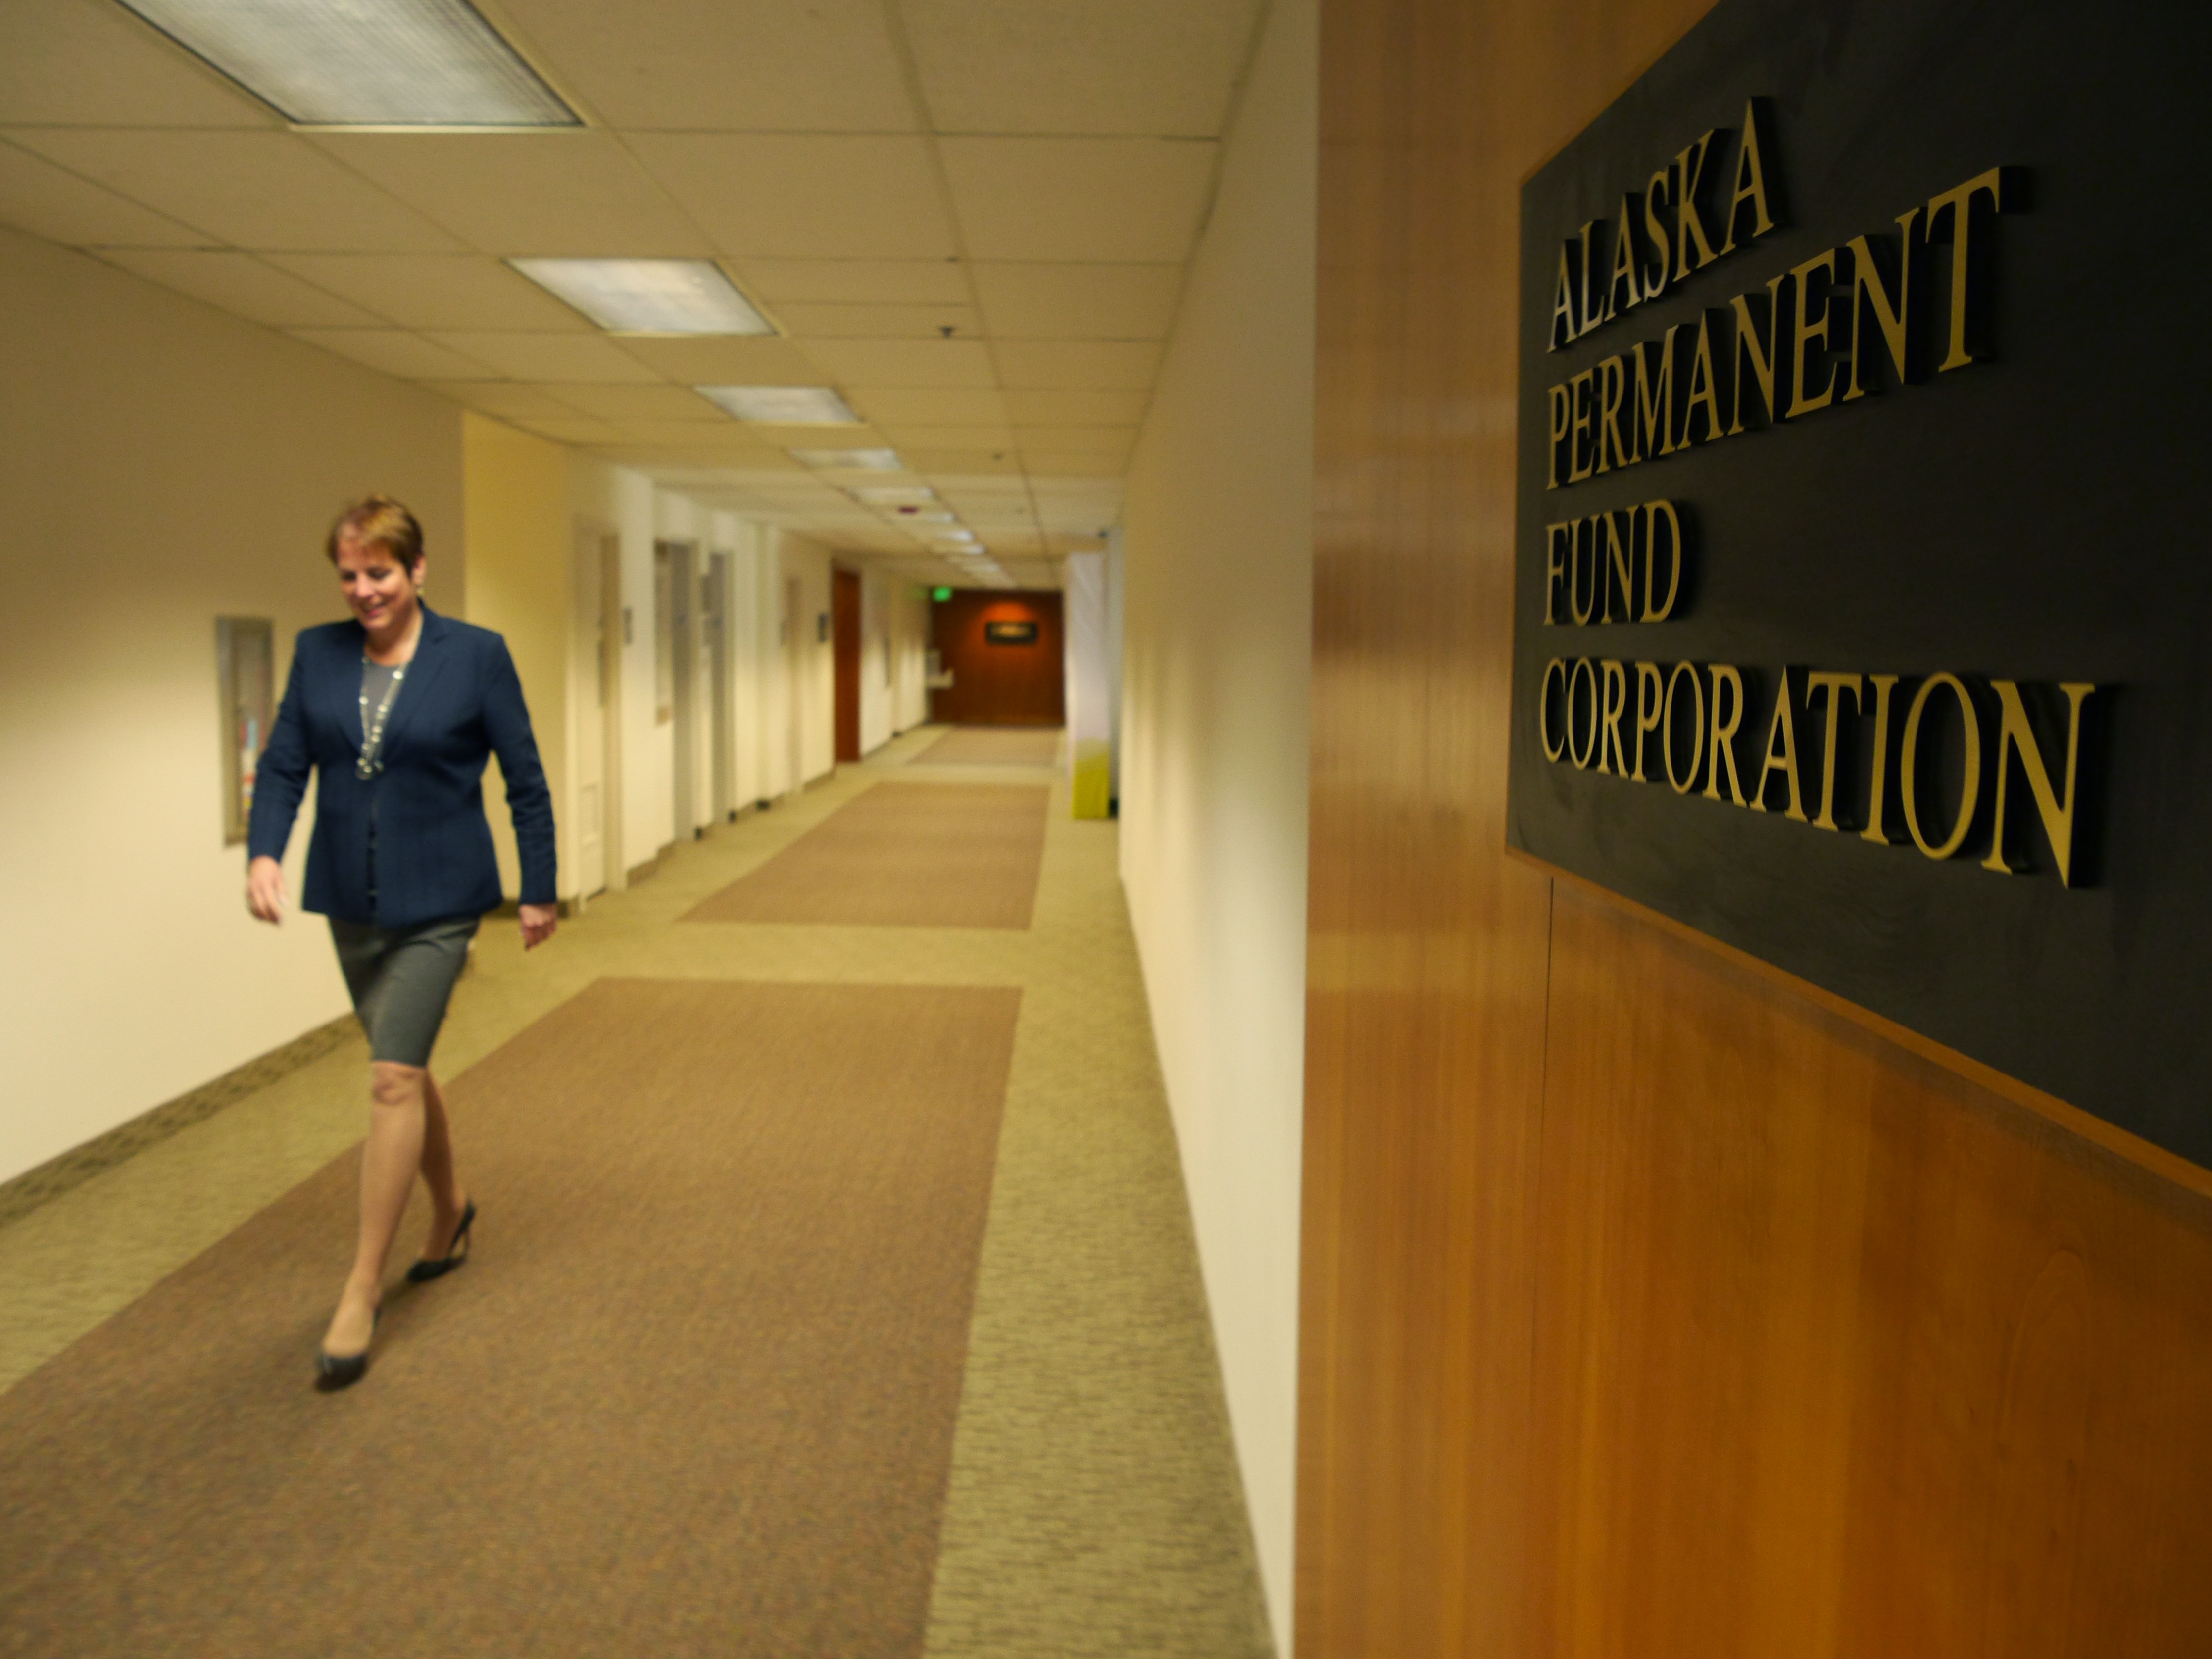 Alaska Permanent Fund Executive Director, Angela Rodell, in the hall at the corporate headquarters, March 14, 2016. (Photo by Skip Gray, 360 North)